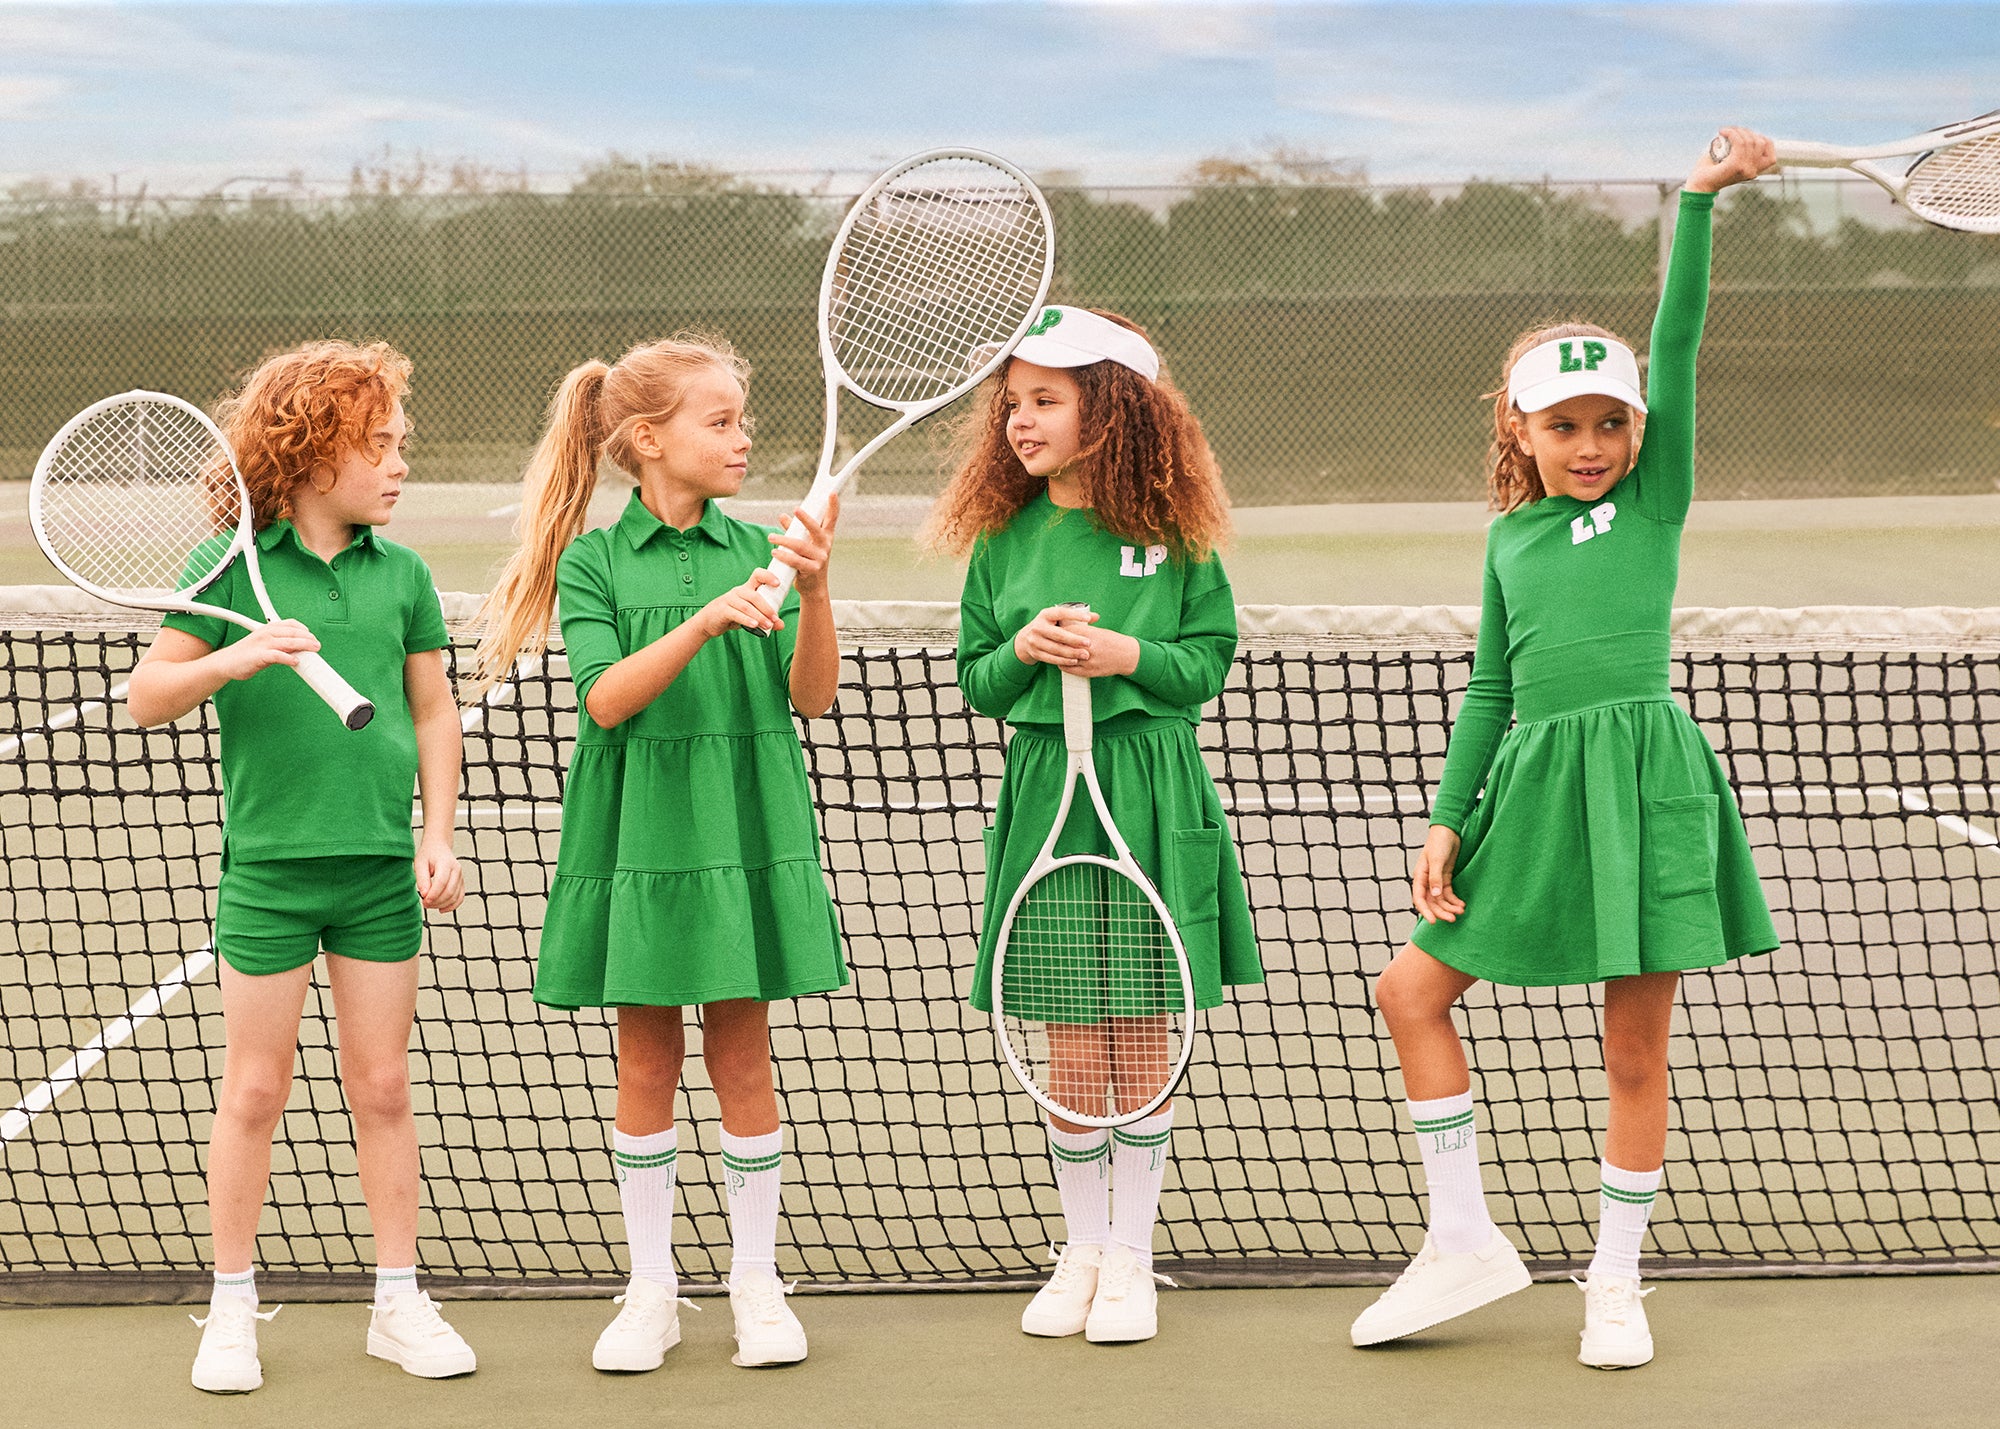 4 children standing outside on a tennis court wearing matching green shorts, tops, skirts and dress